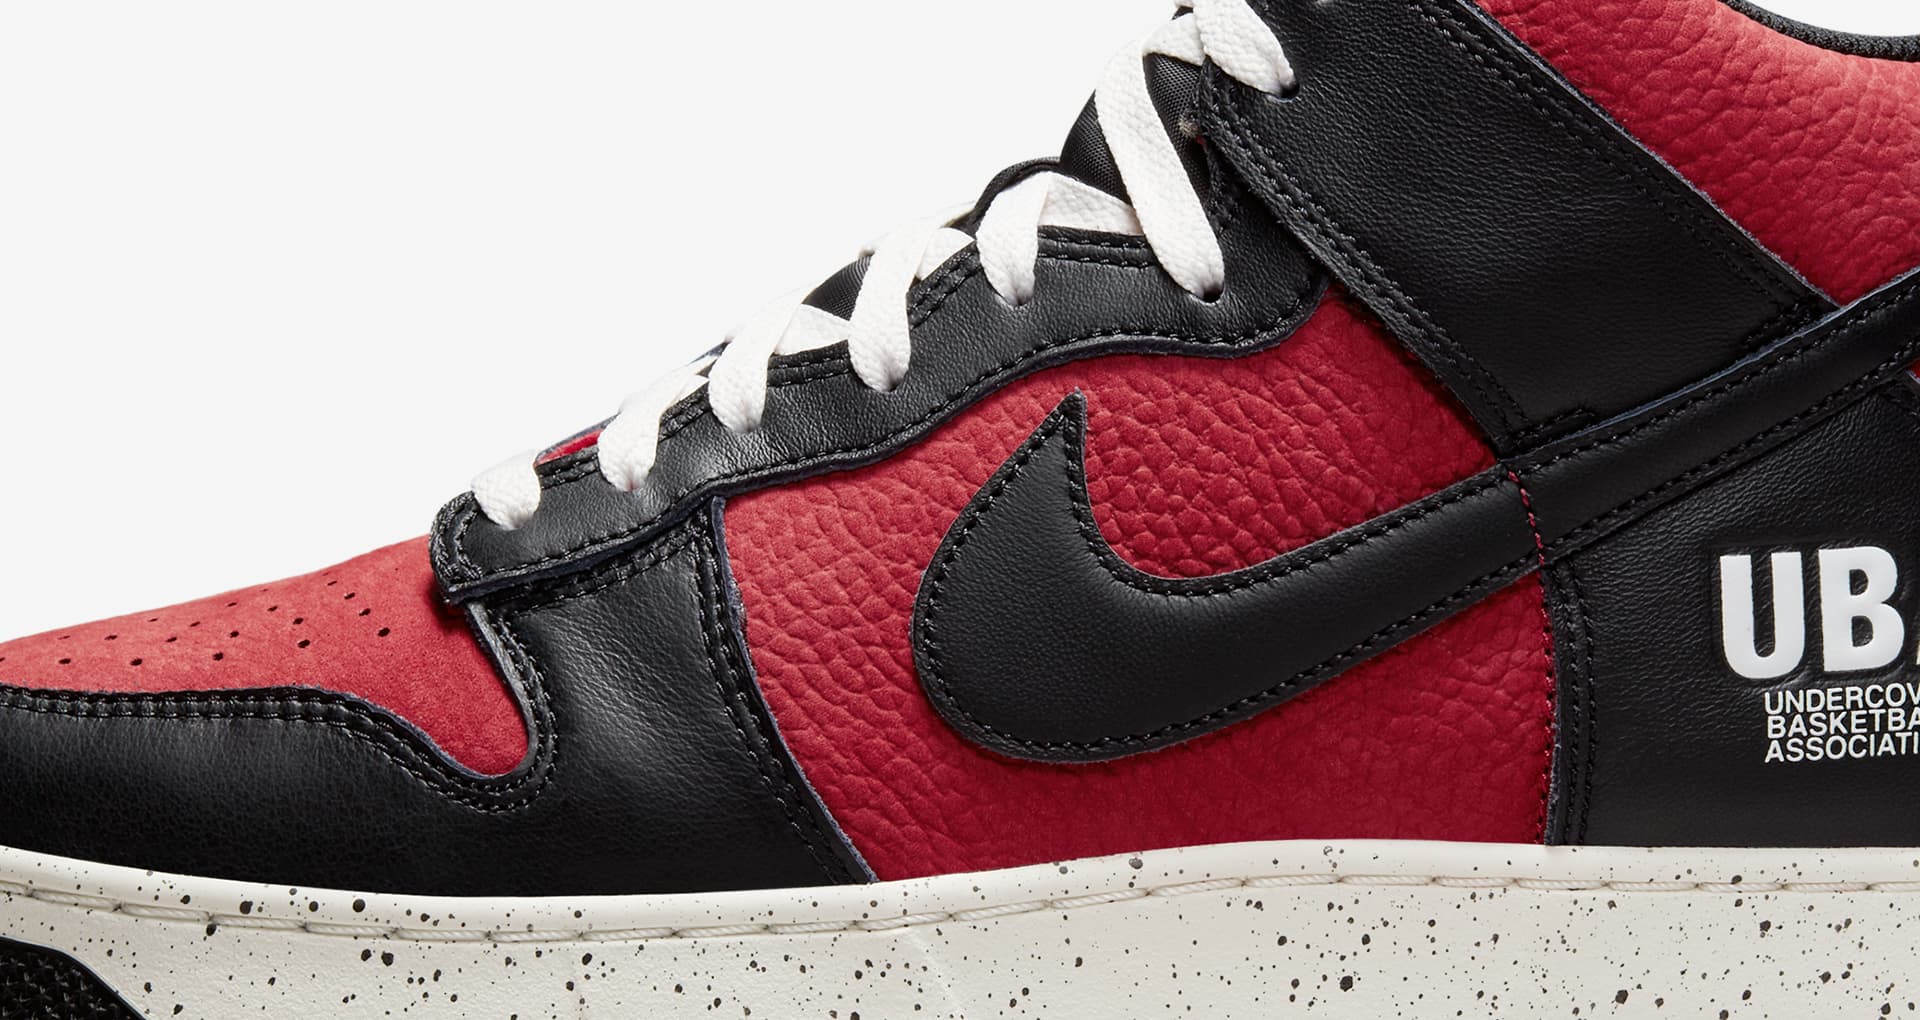 Dunk High 1985 x UNDERCOVER 'Gym Red' Release Date. Nike SNKRS IN